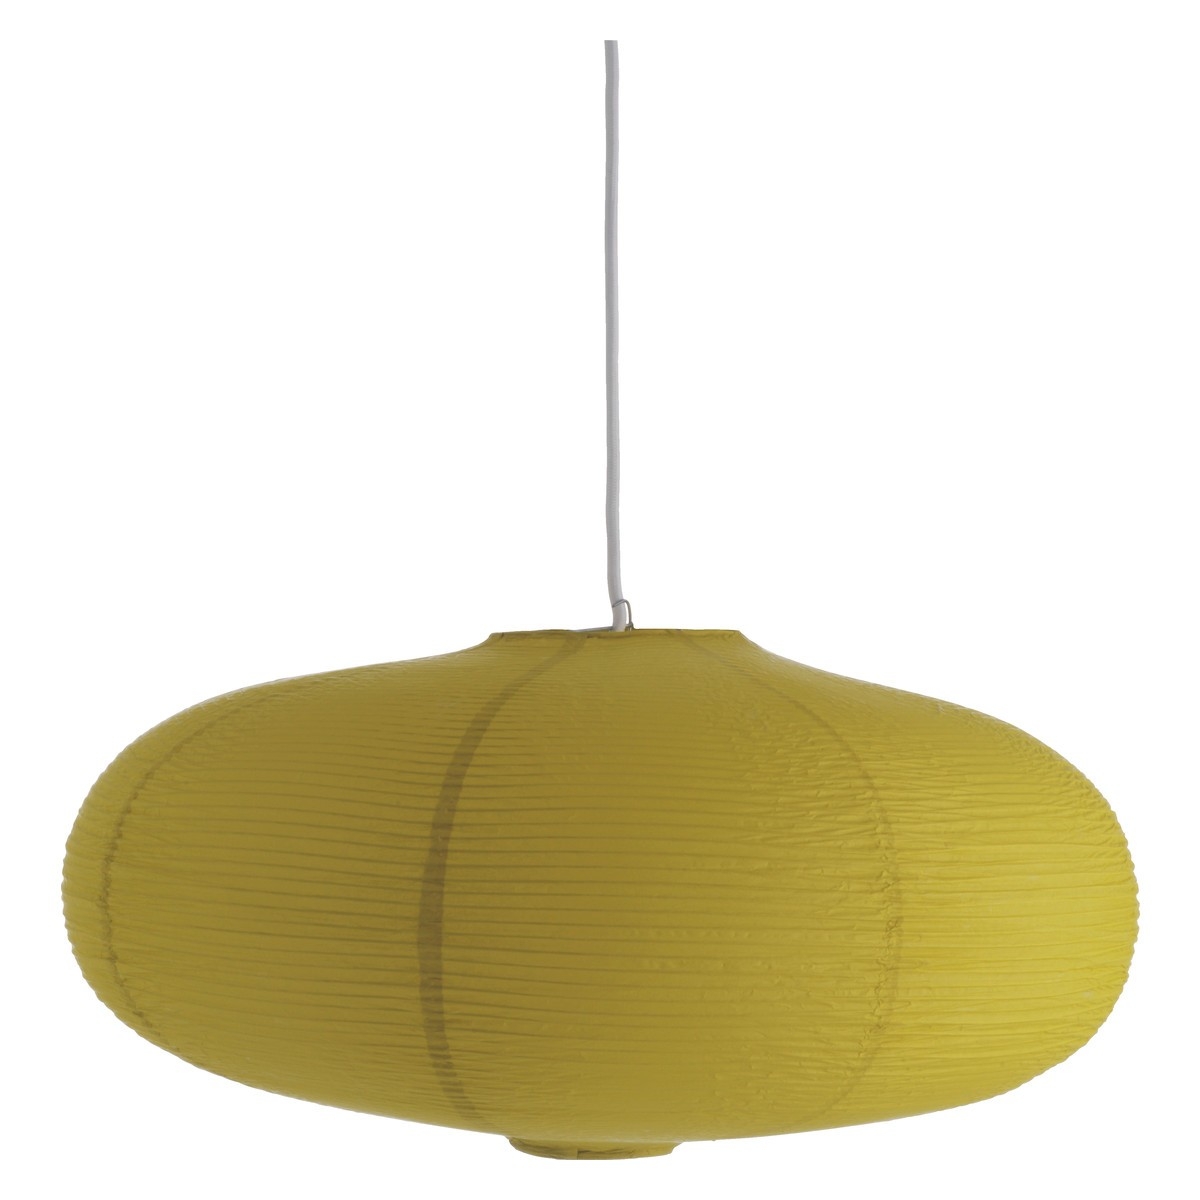 Permalink to Paper Ceiling Light Shade